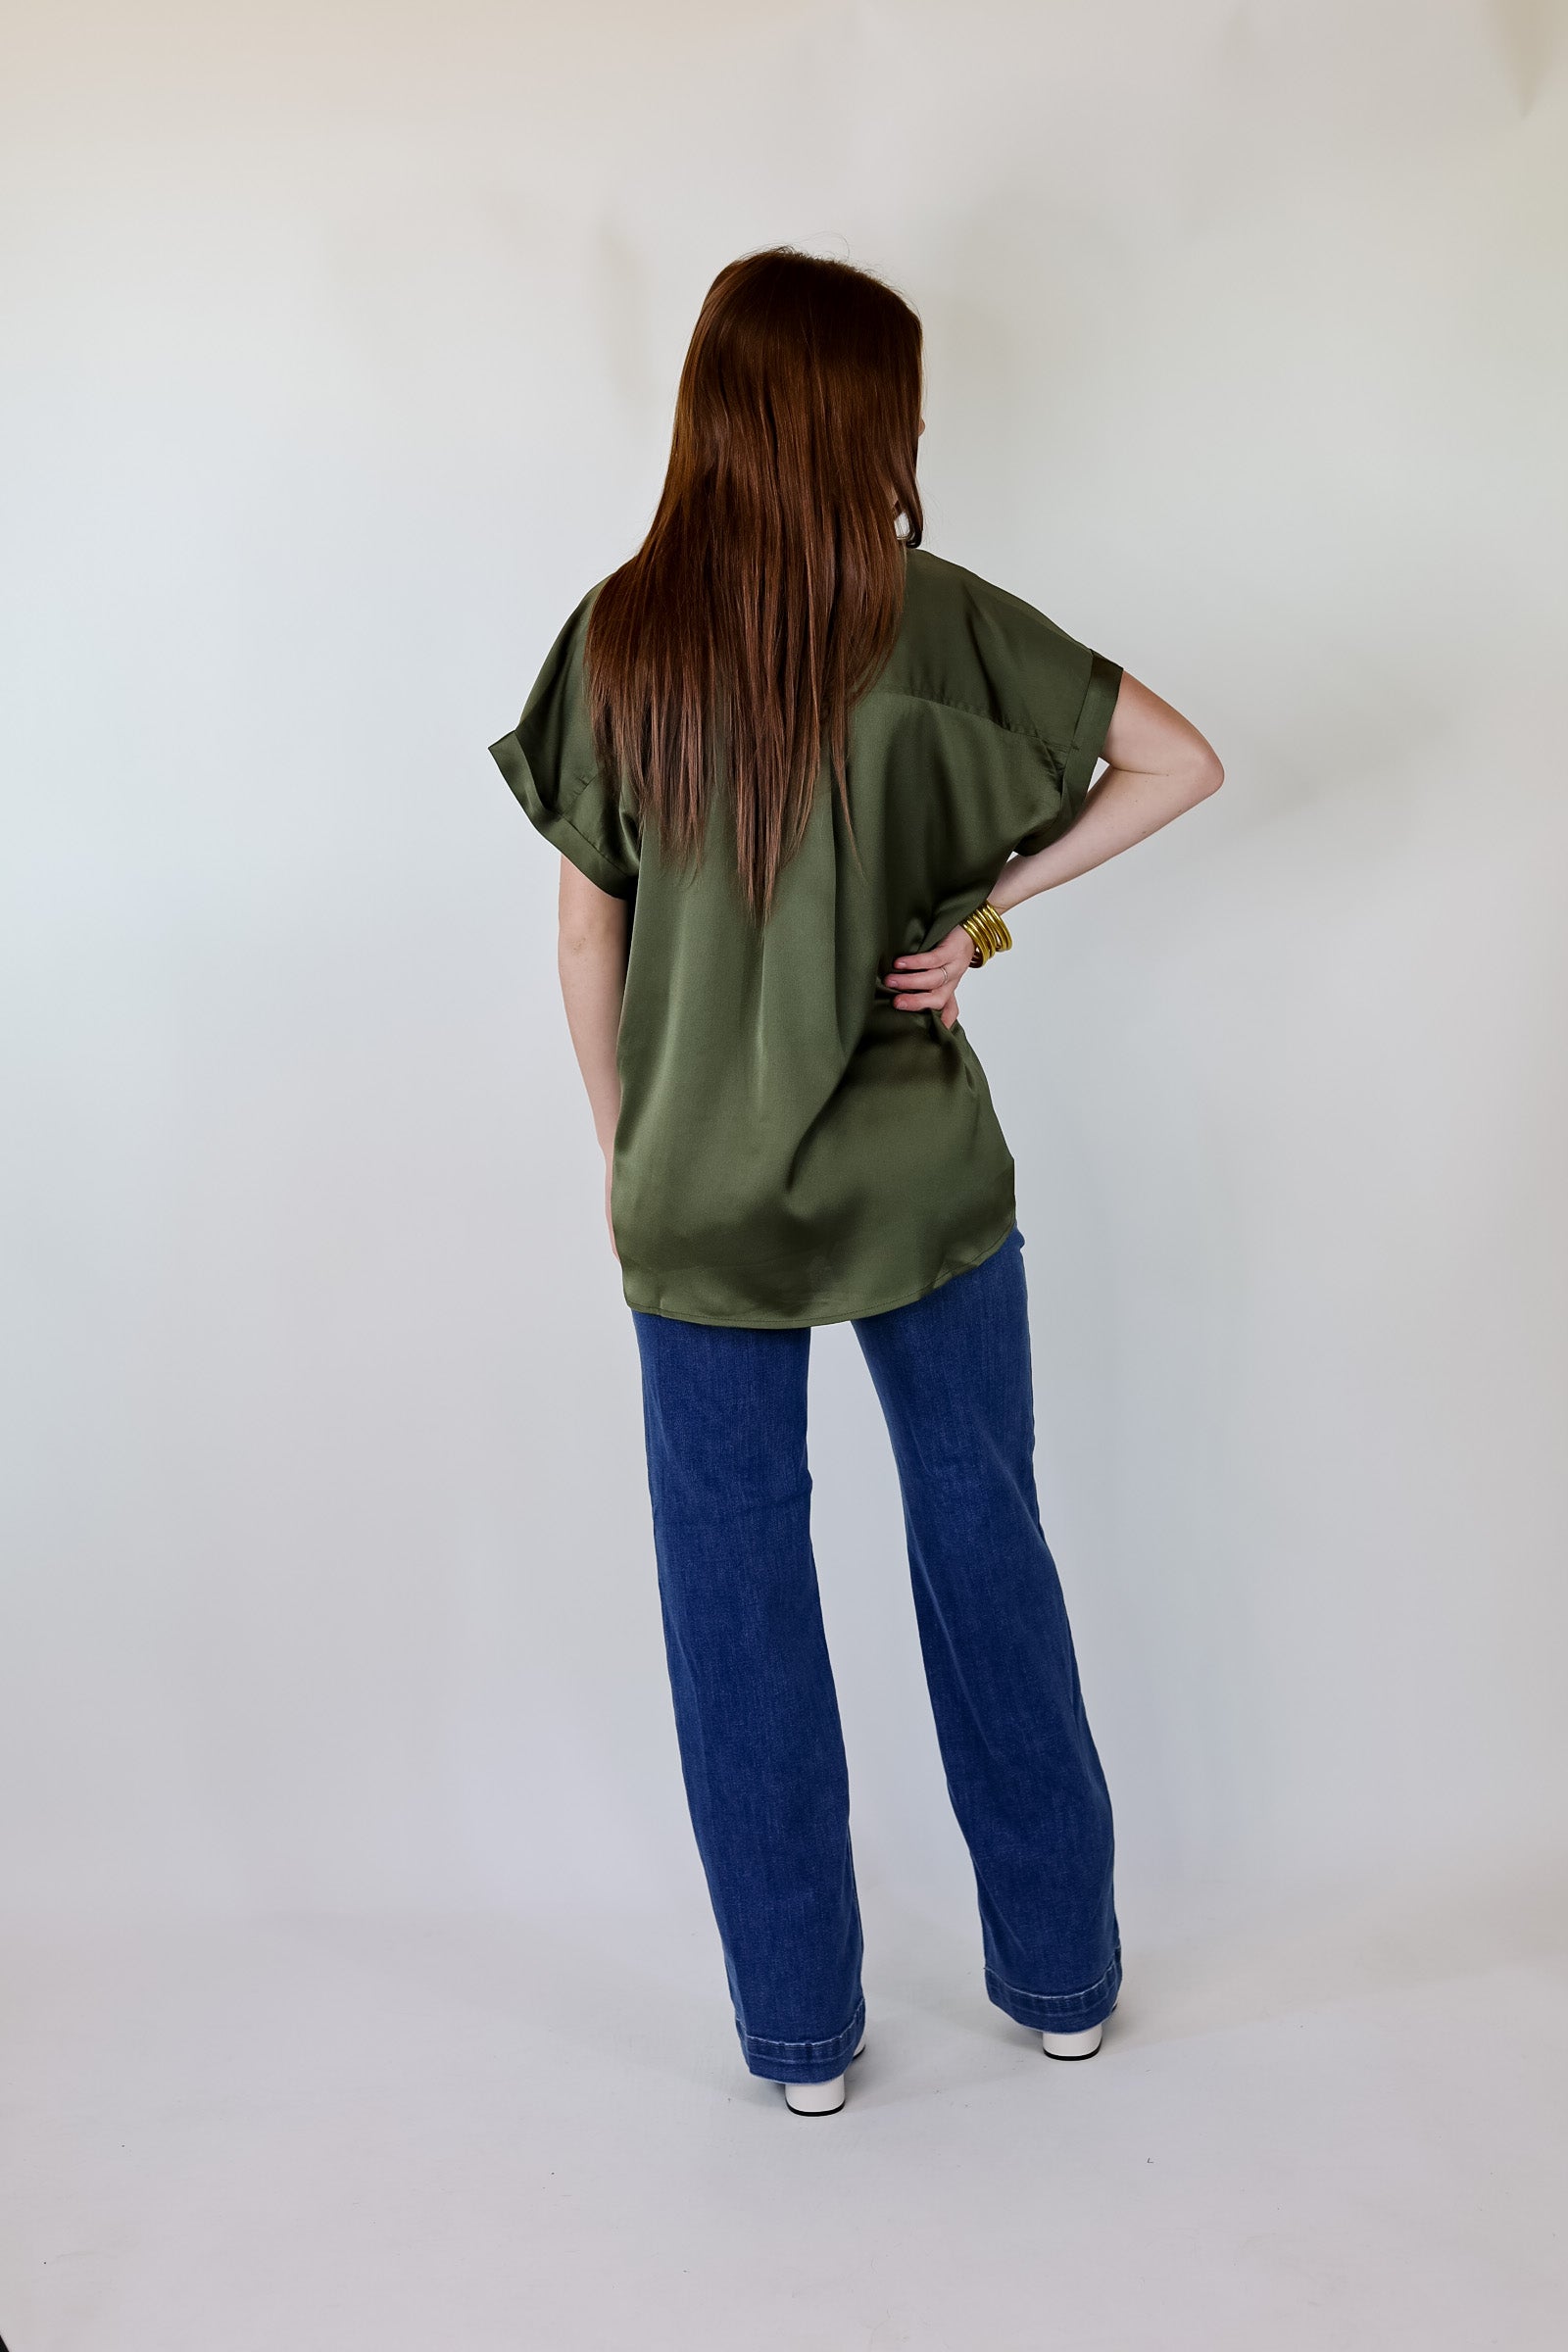 Free To Be Fab Button Up Short Sleeve Top in Olive Green - Giddy Up Glamour Boutique